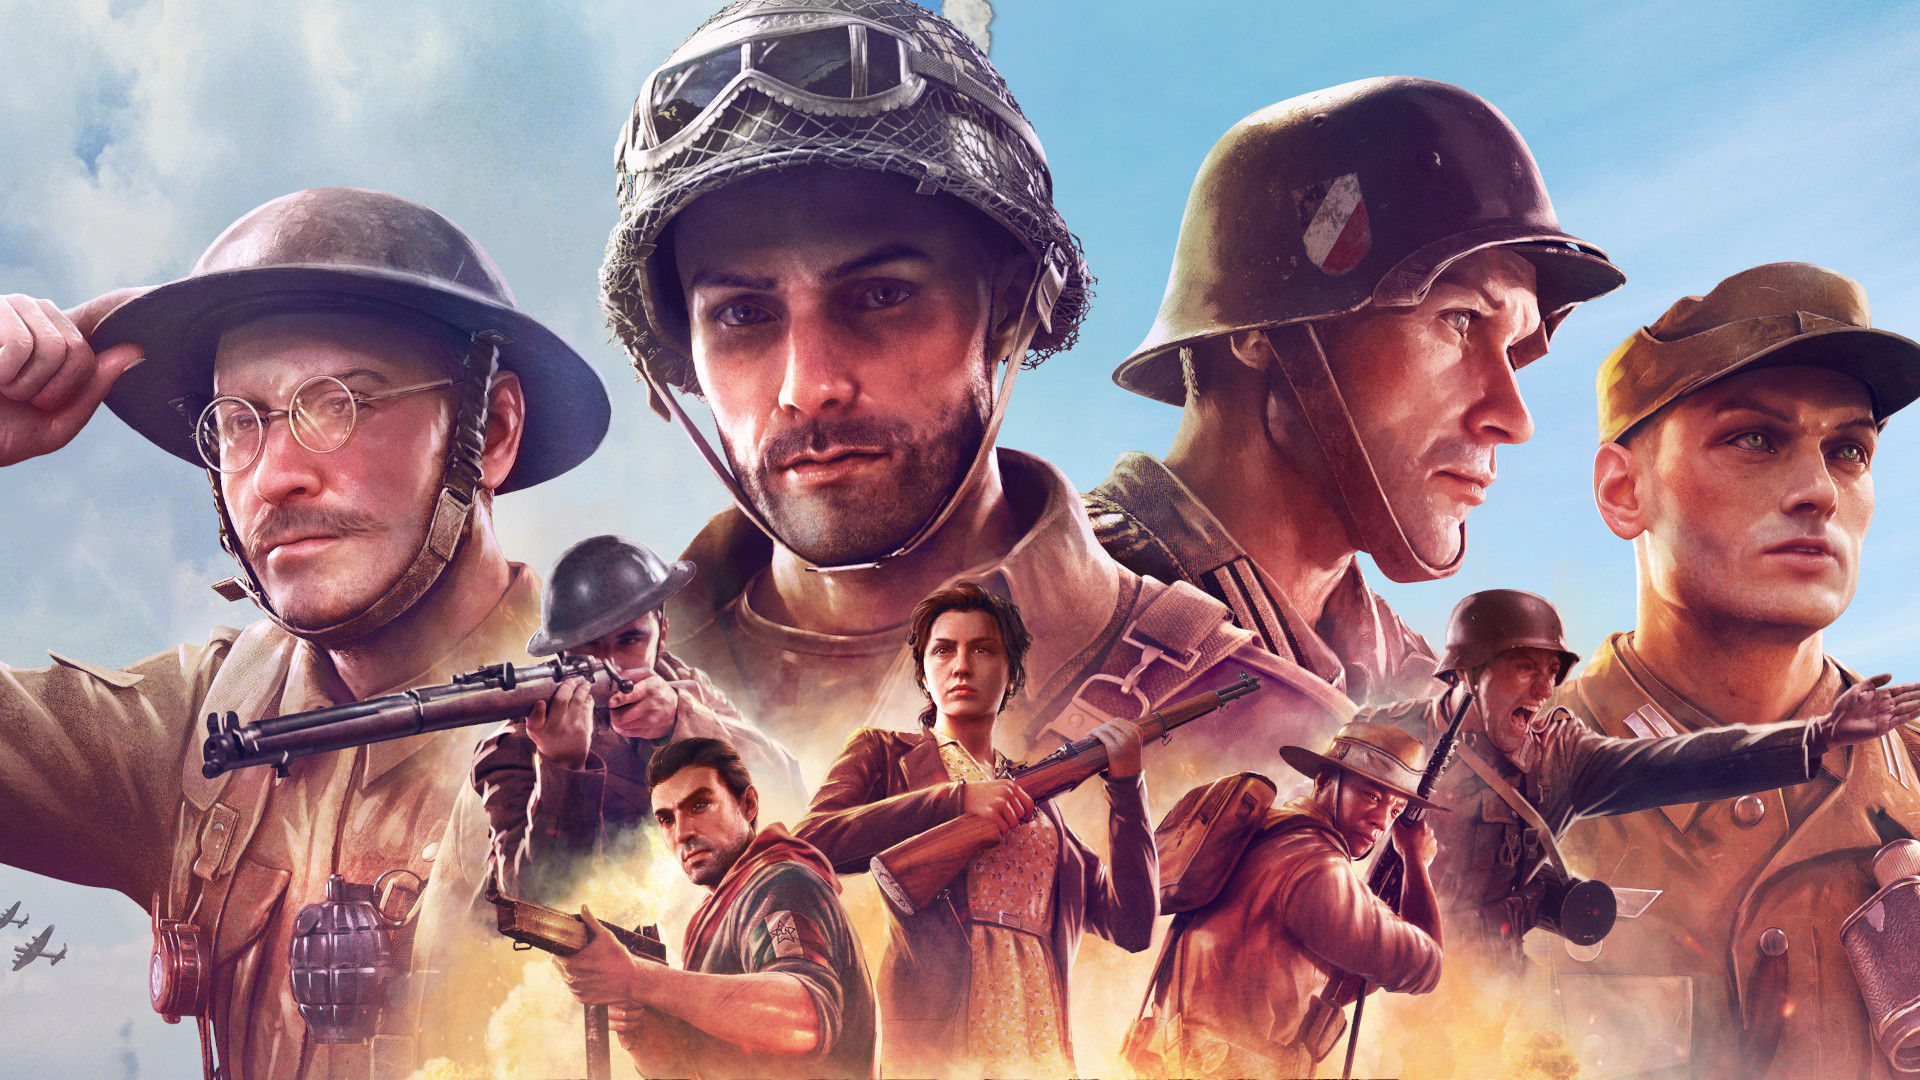 company-of-heroes-3-system-requirements-1.jpg